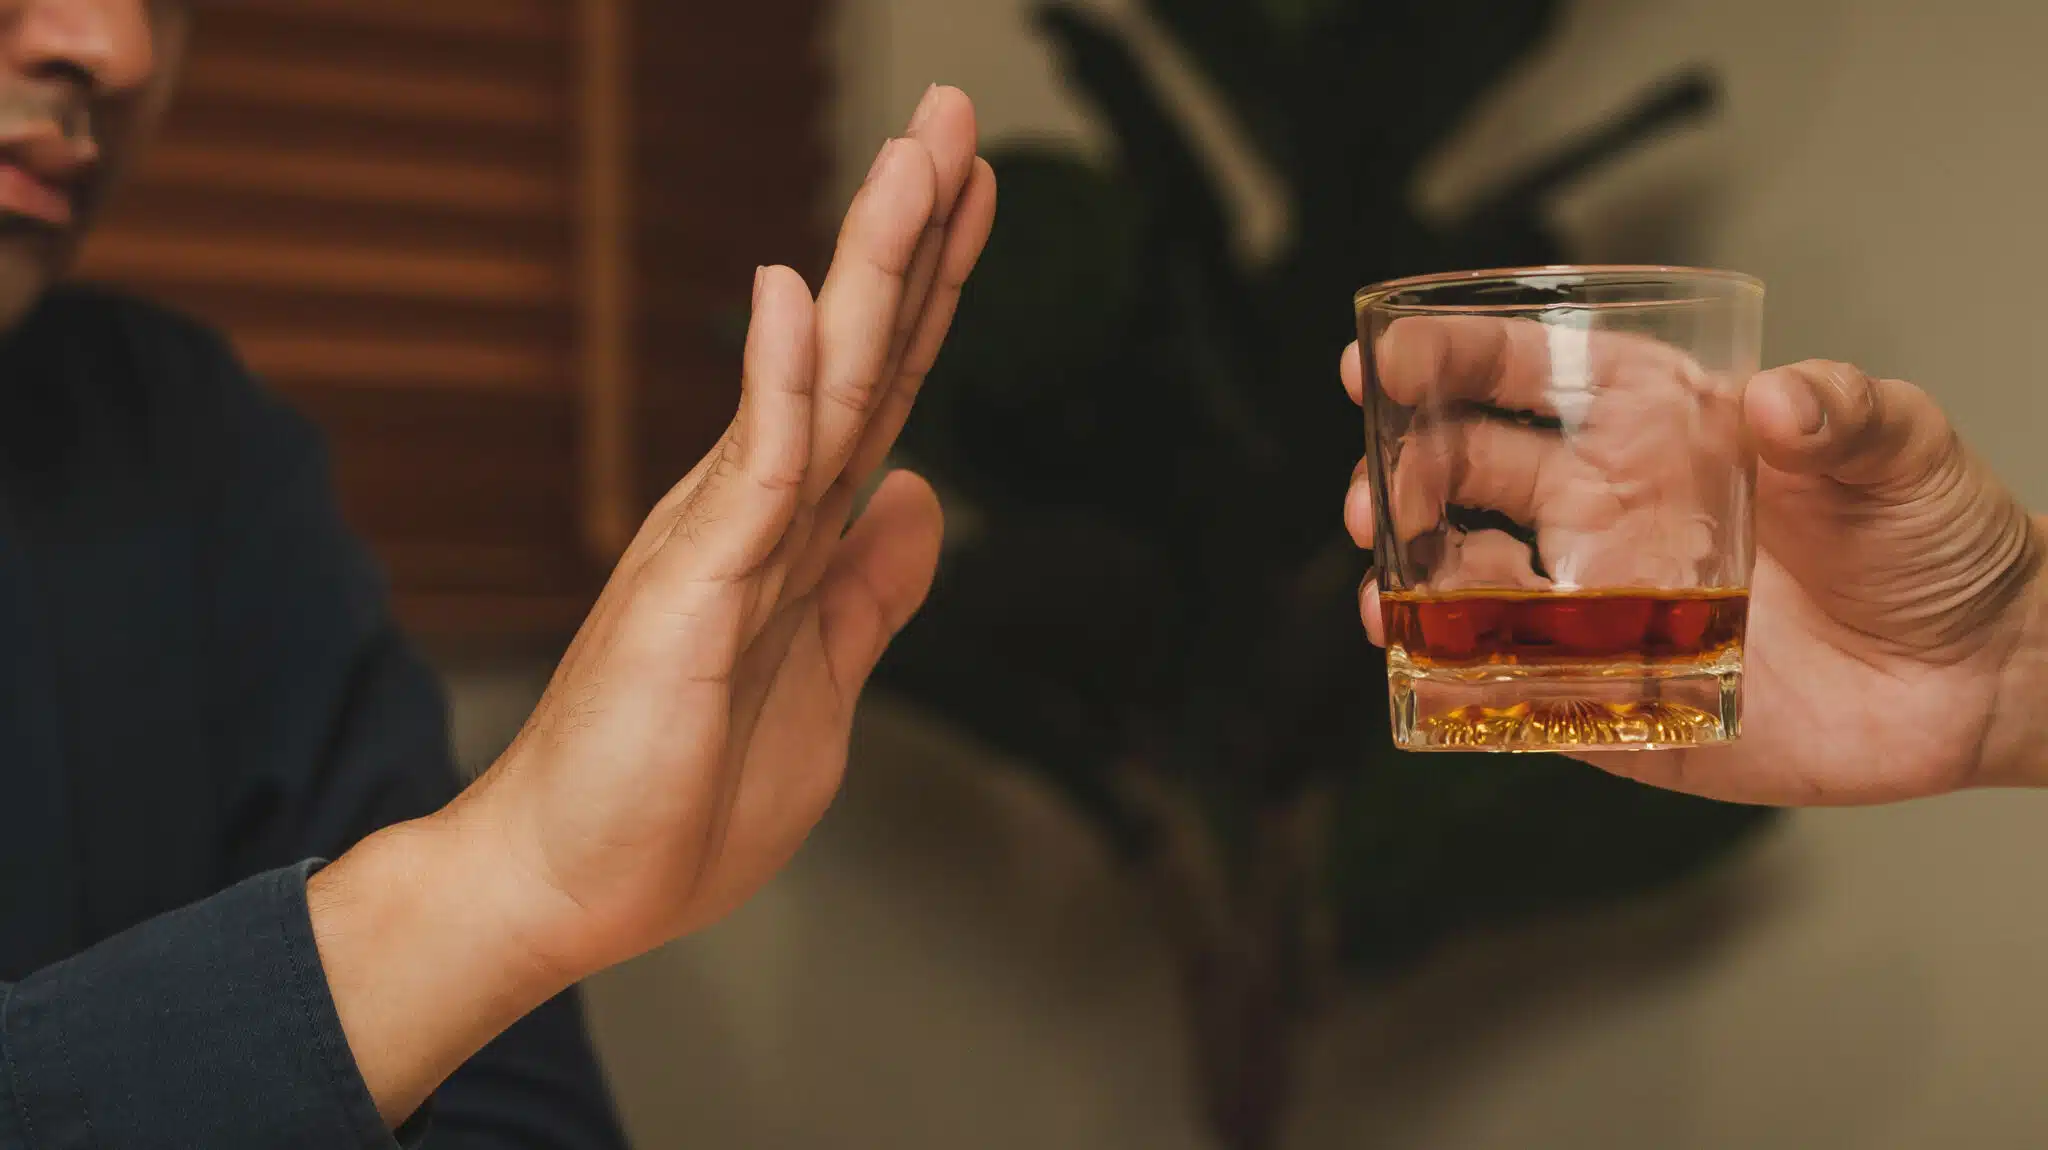 A man holds up his hand rejecting a glass of alcohol - Dealing With Impulse Control In Recovery